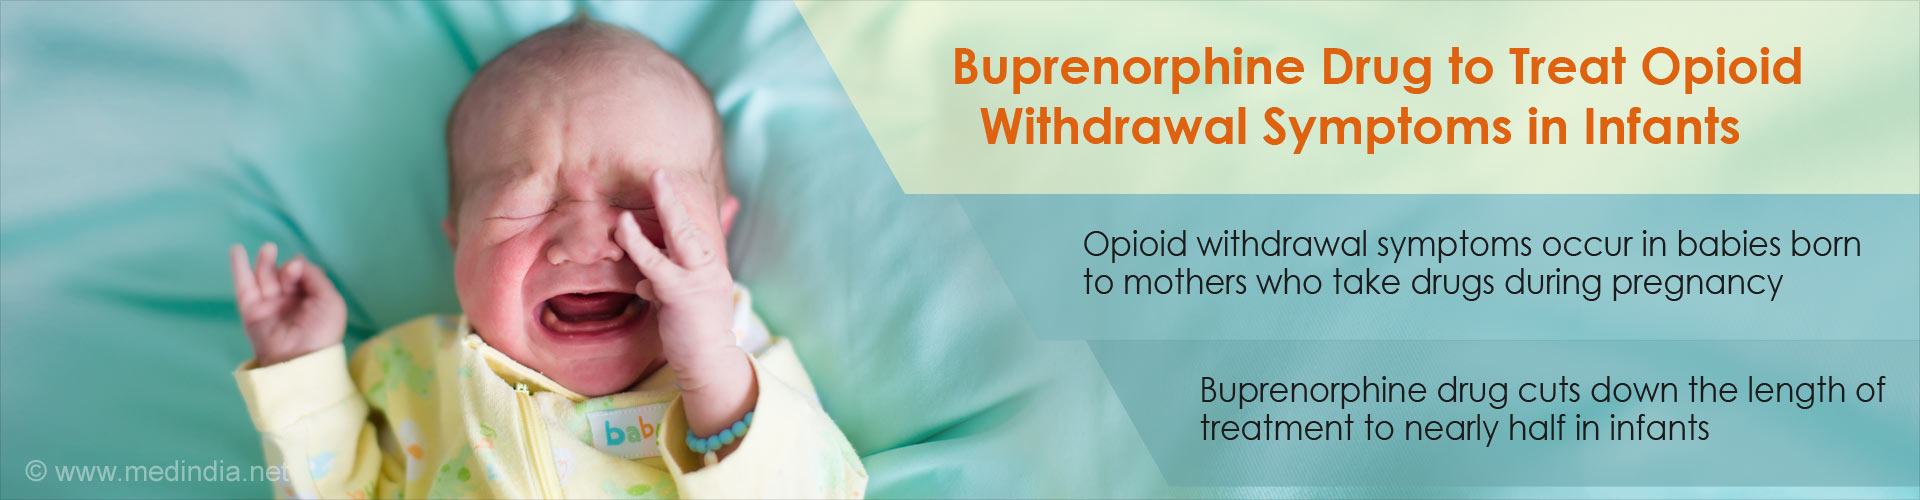 Buprenorphine drug to treat opioid withdrawal symptoms in infants
- Opioid wihdrawal symptoms occur in babies born to mothers who take drugs during pregnancy
- Buprenorphine drug cuts down the length of treatment to nearly half in infants